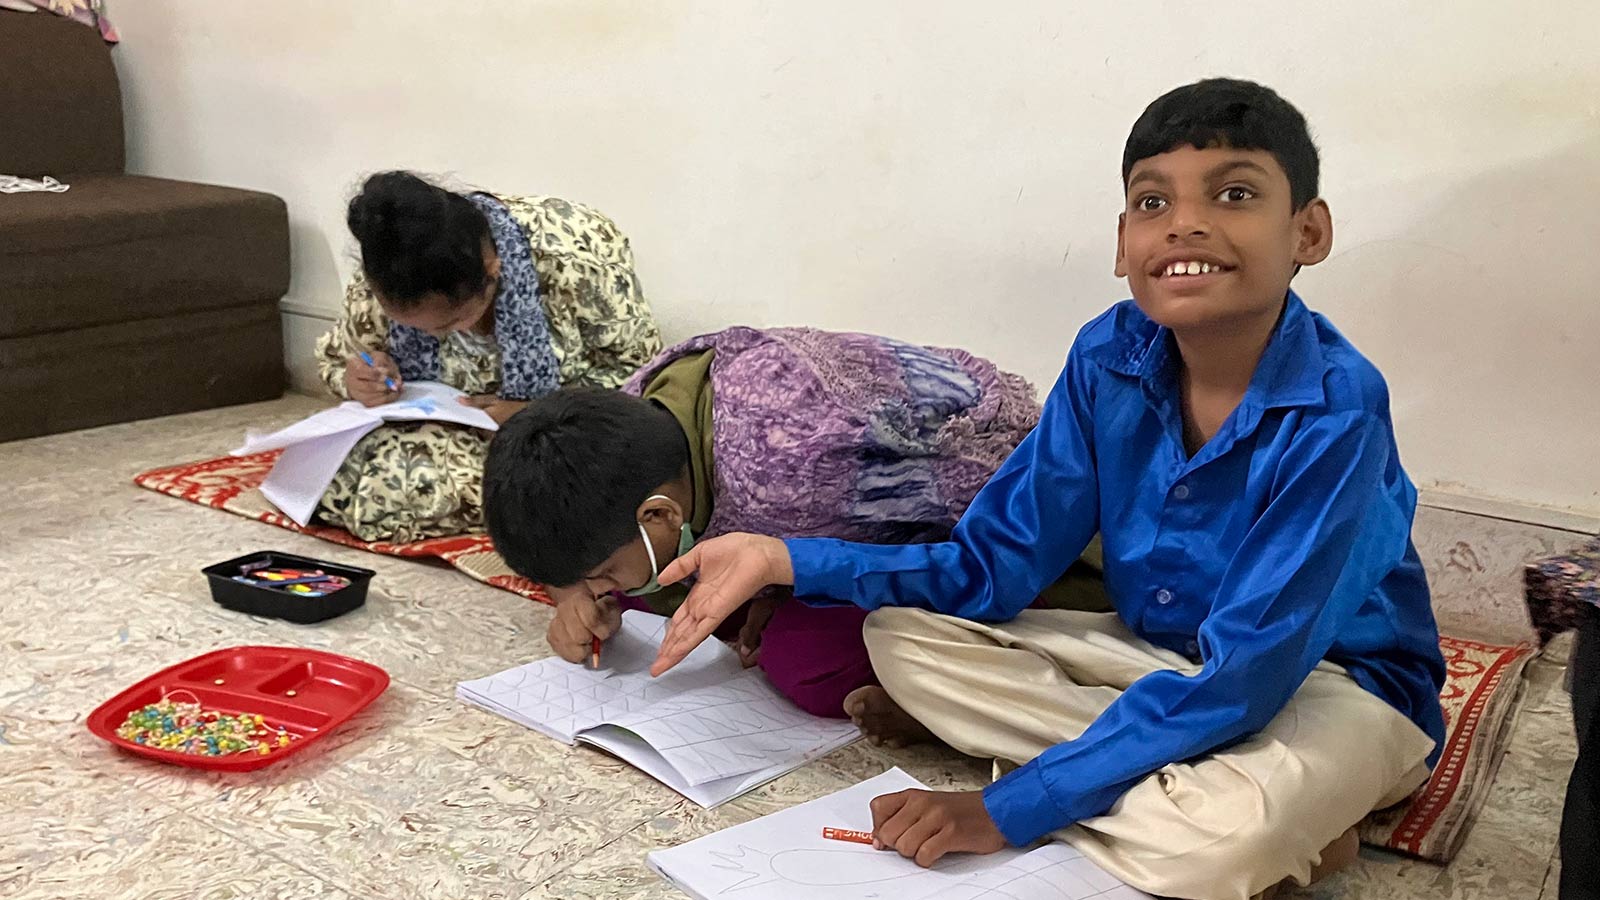 Children with disabilities reading and writing in India